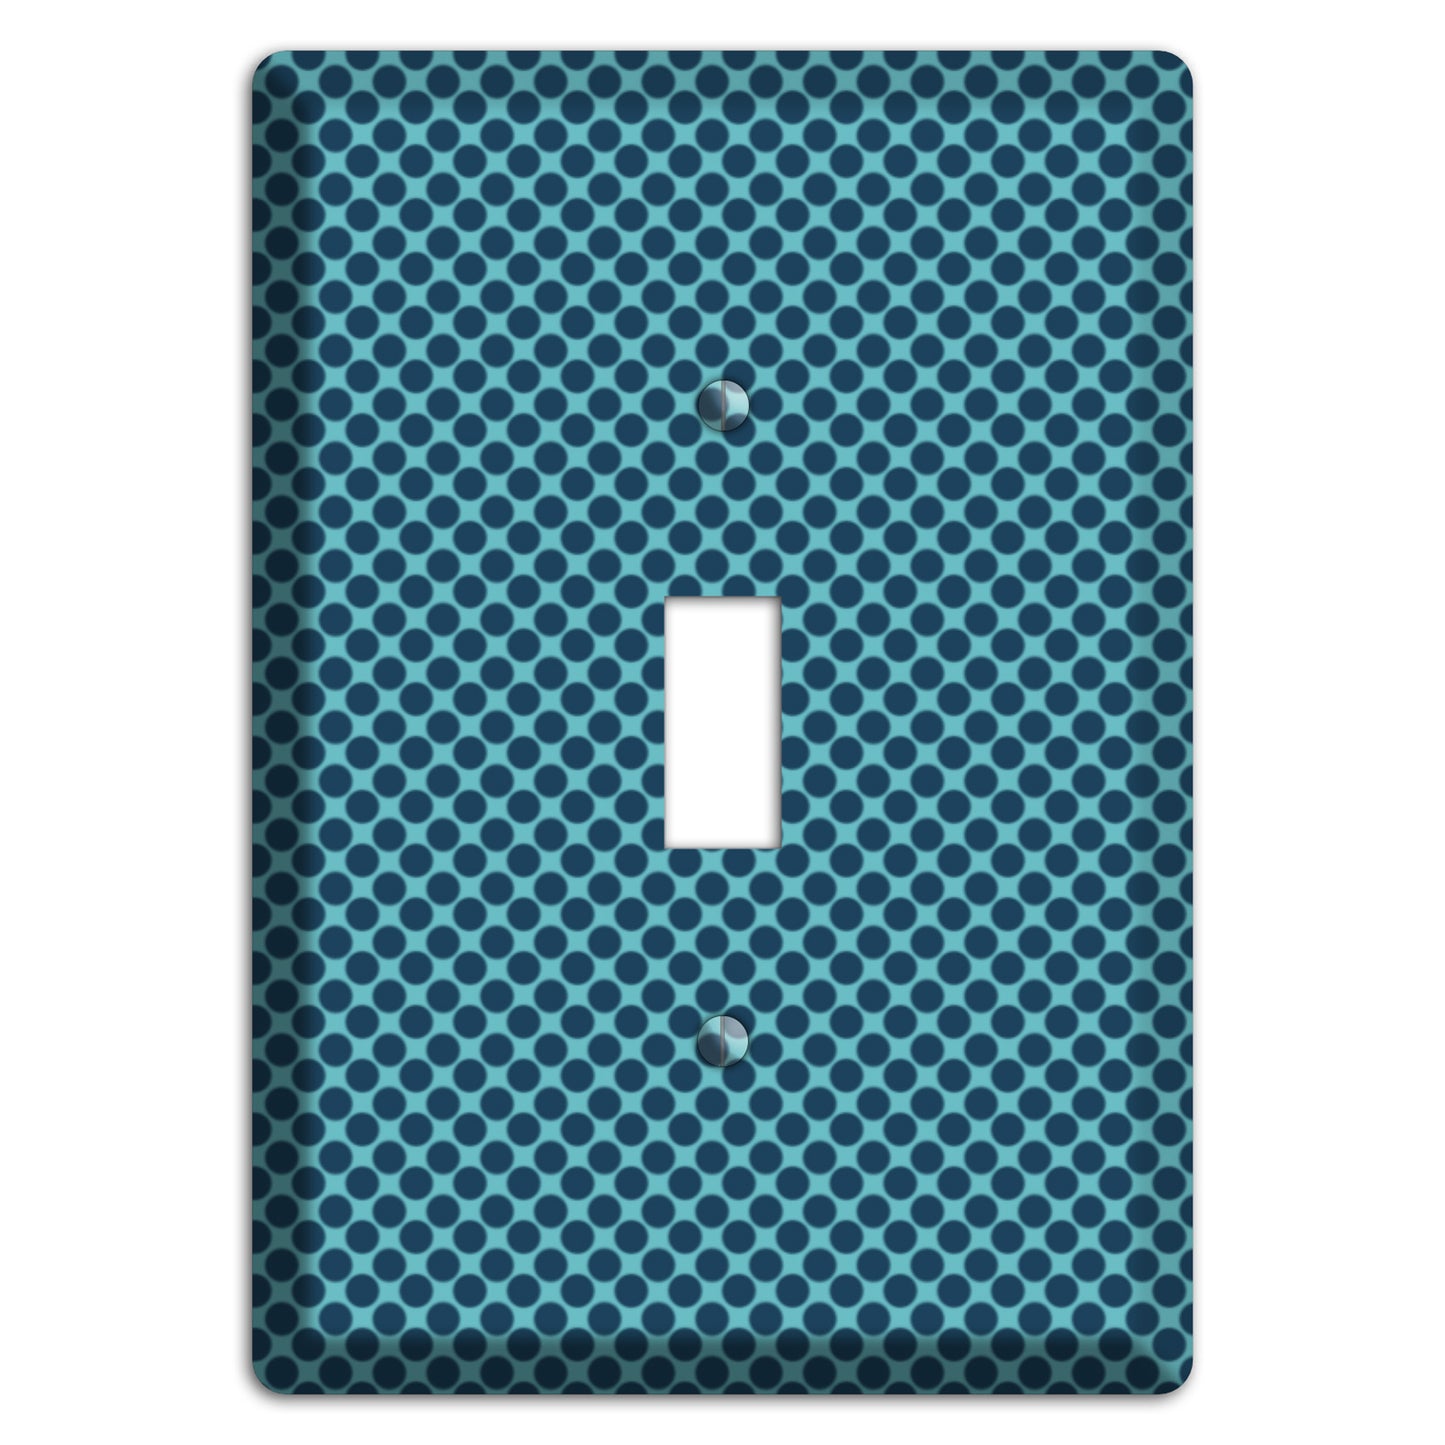 Turquoise with Blue Packed Polka Dots Cover Plates